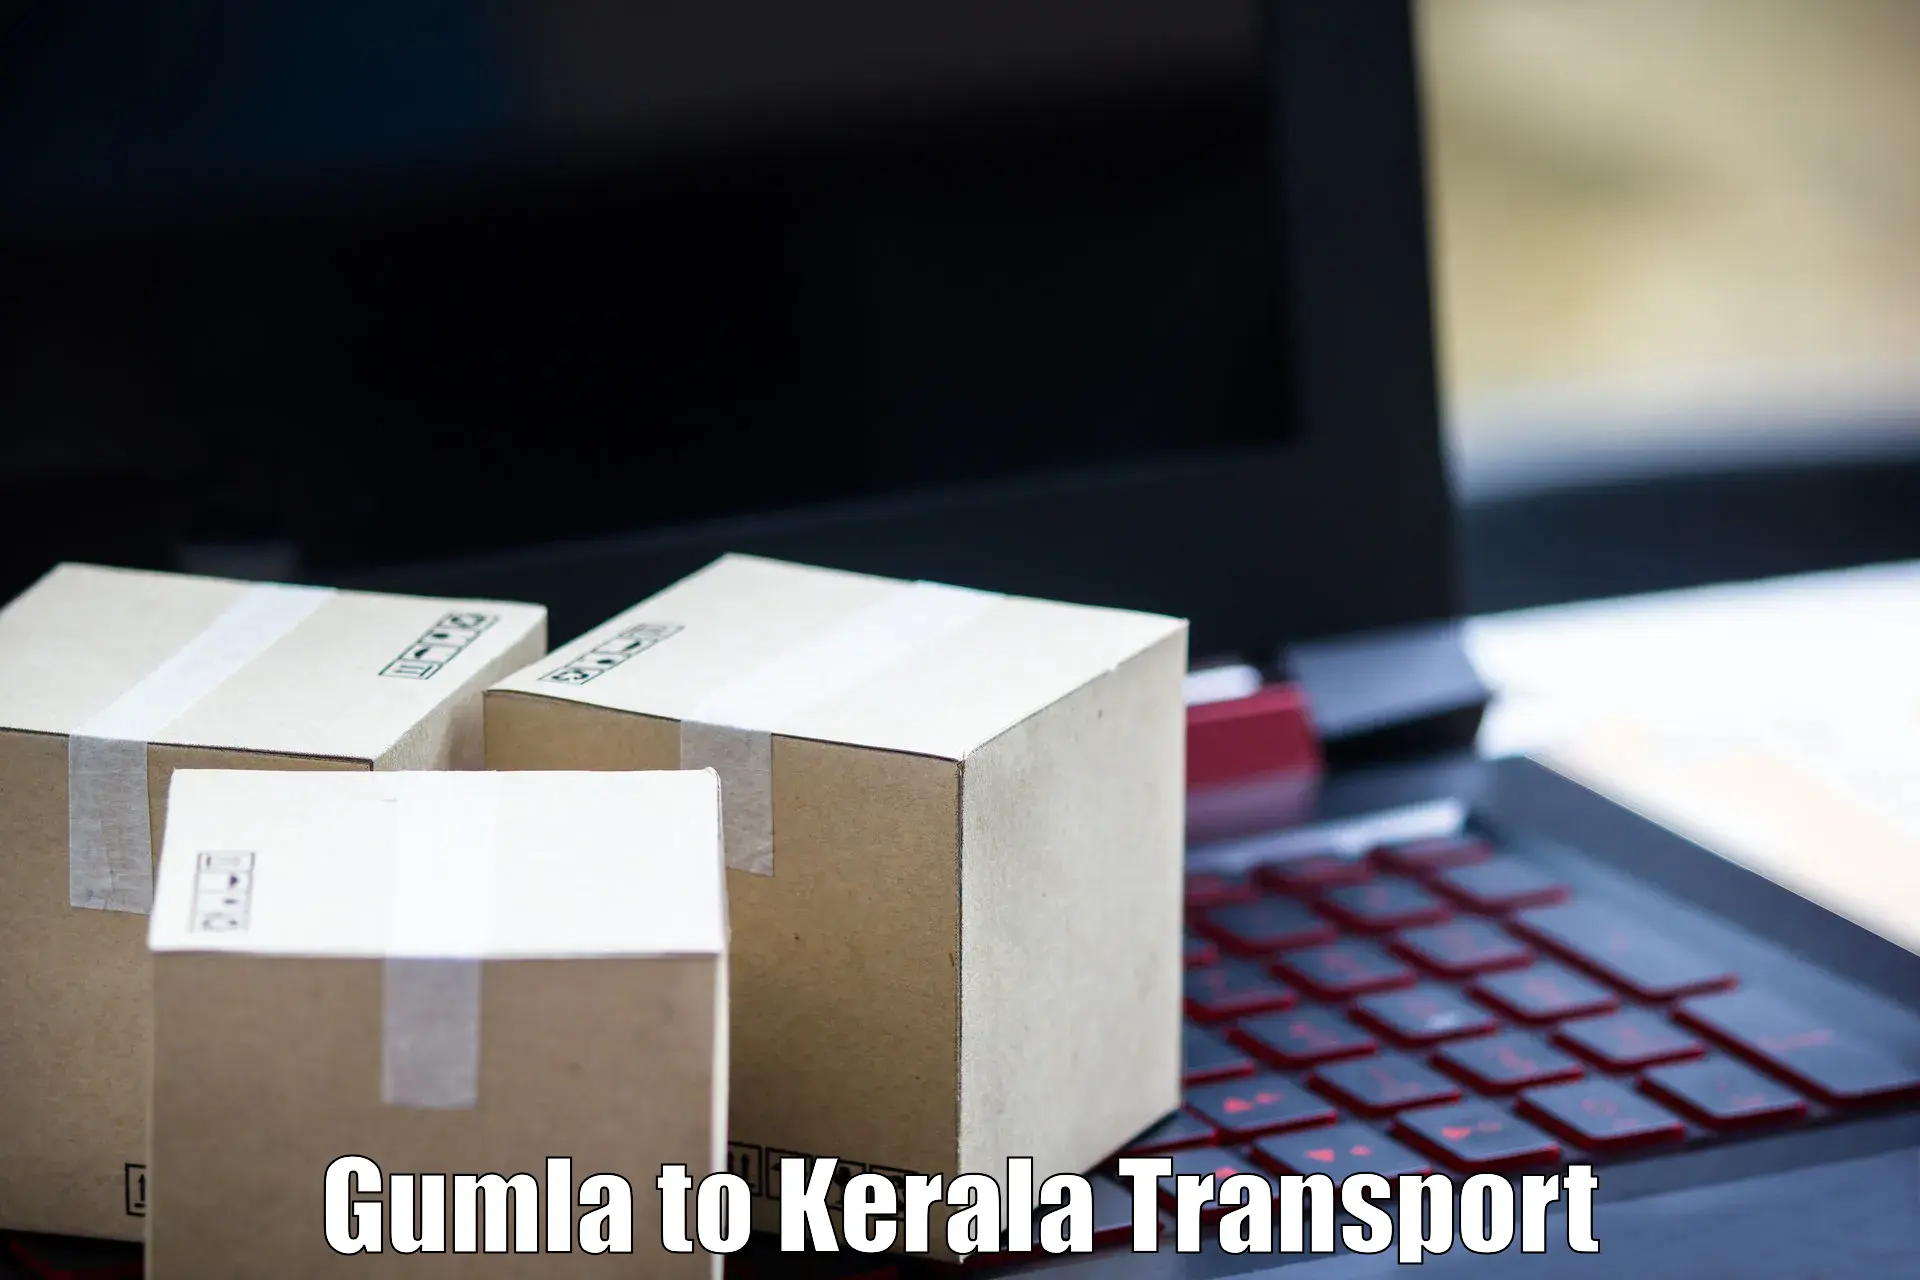 Truck transport companies in India Gumla to Chalakudy